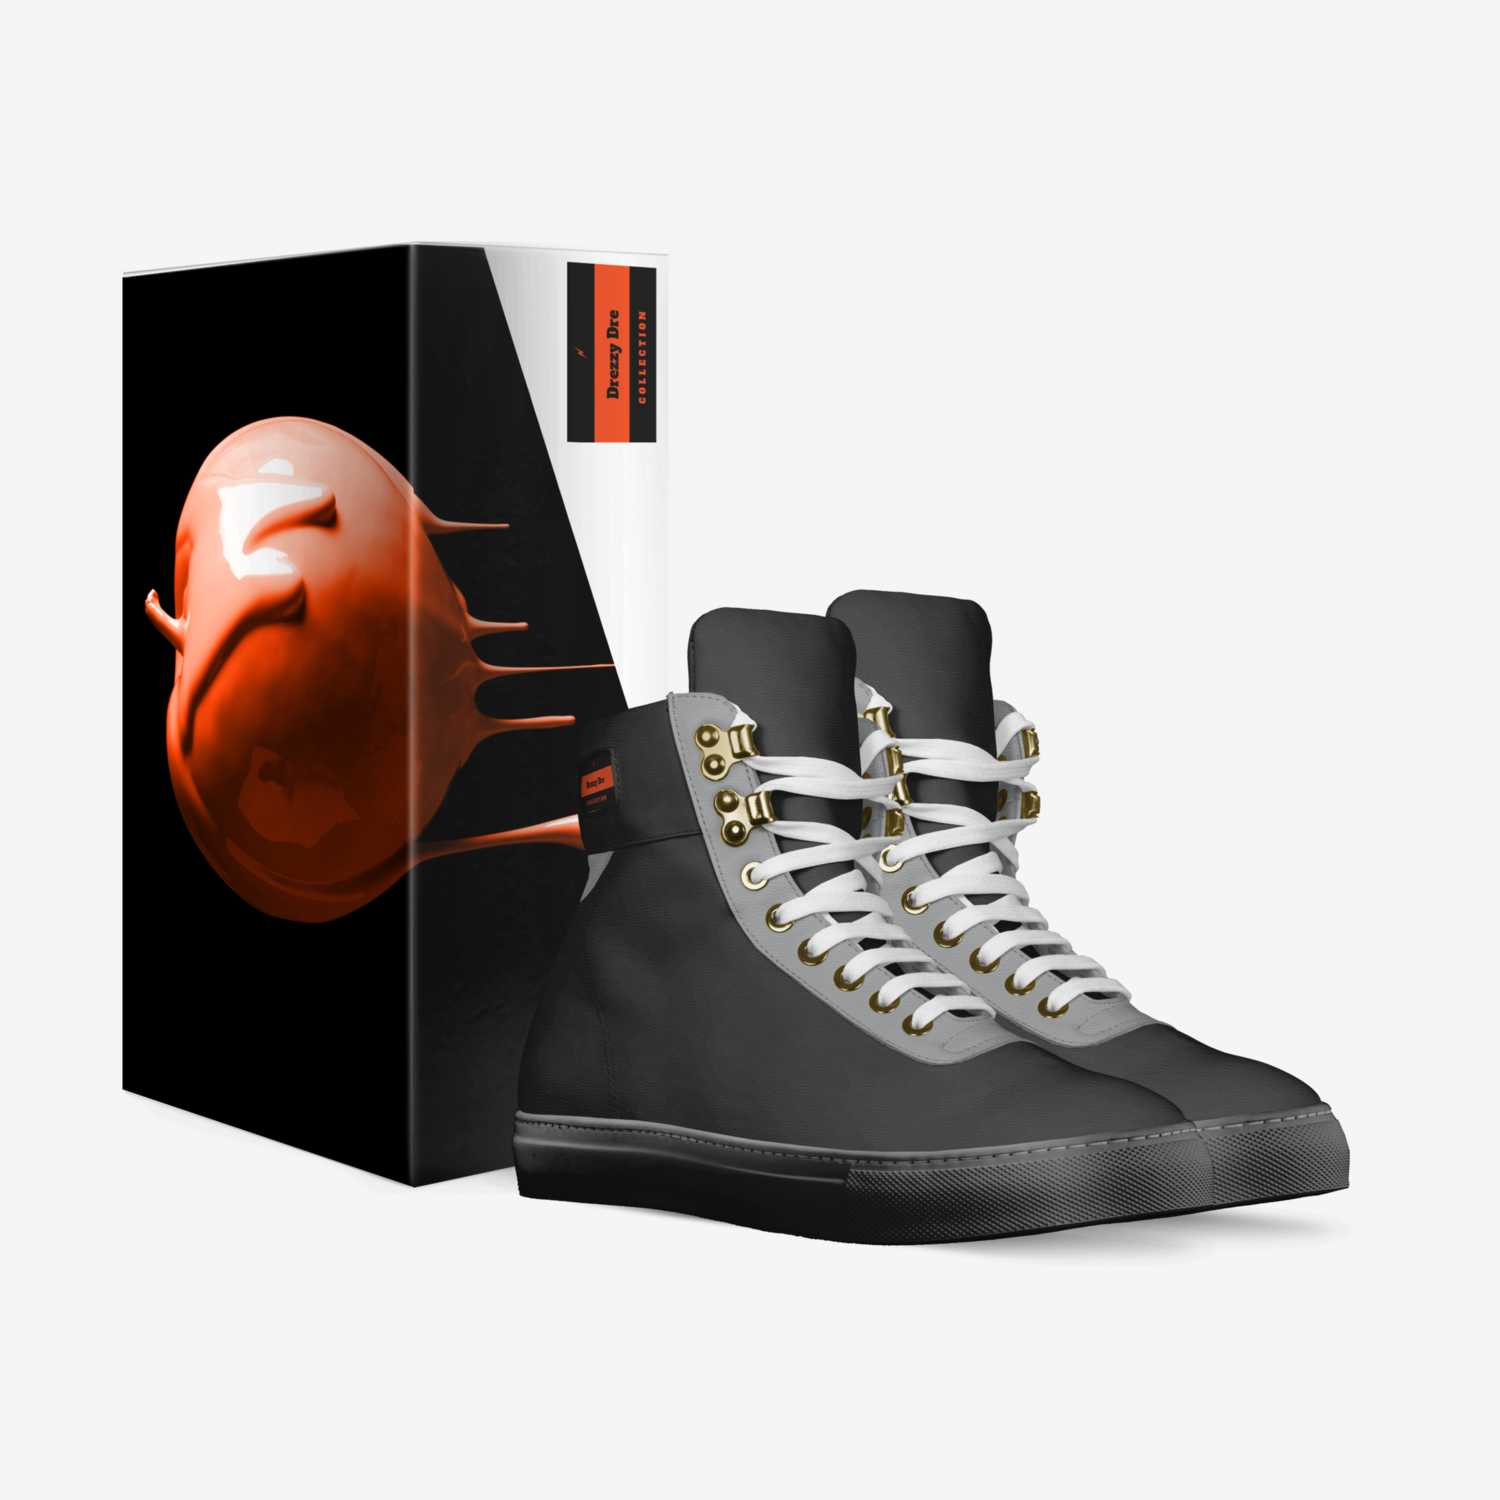 Drezzy Dre custom made in Italy shoes by Andre Cancellare | Box view